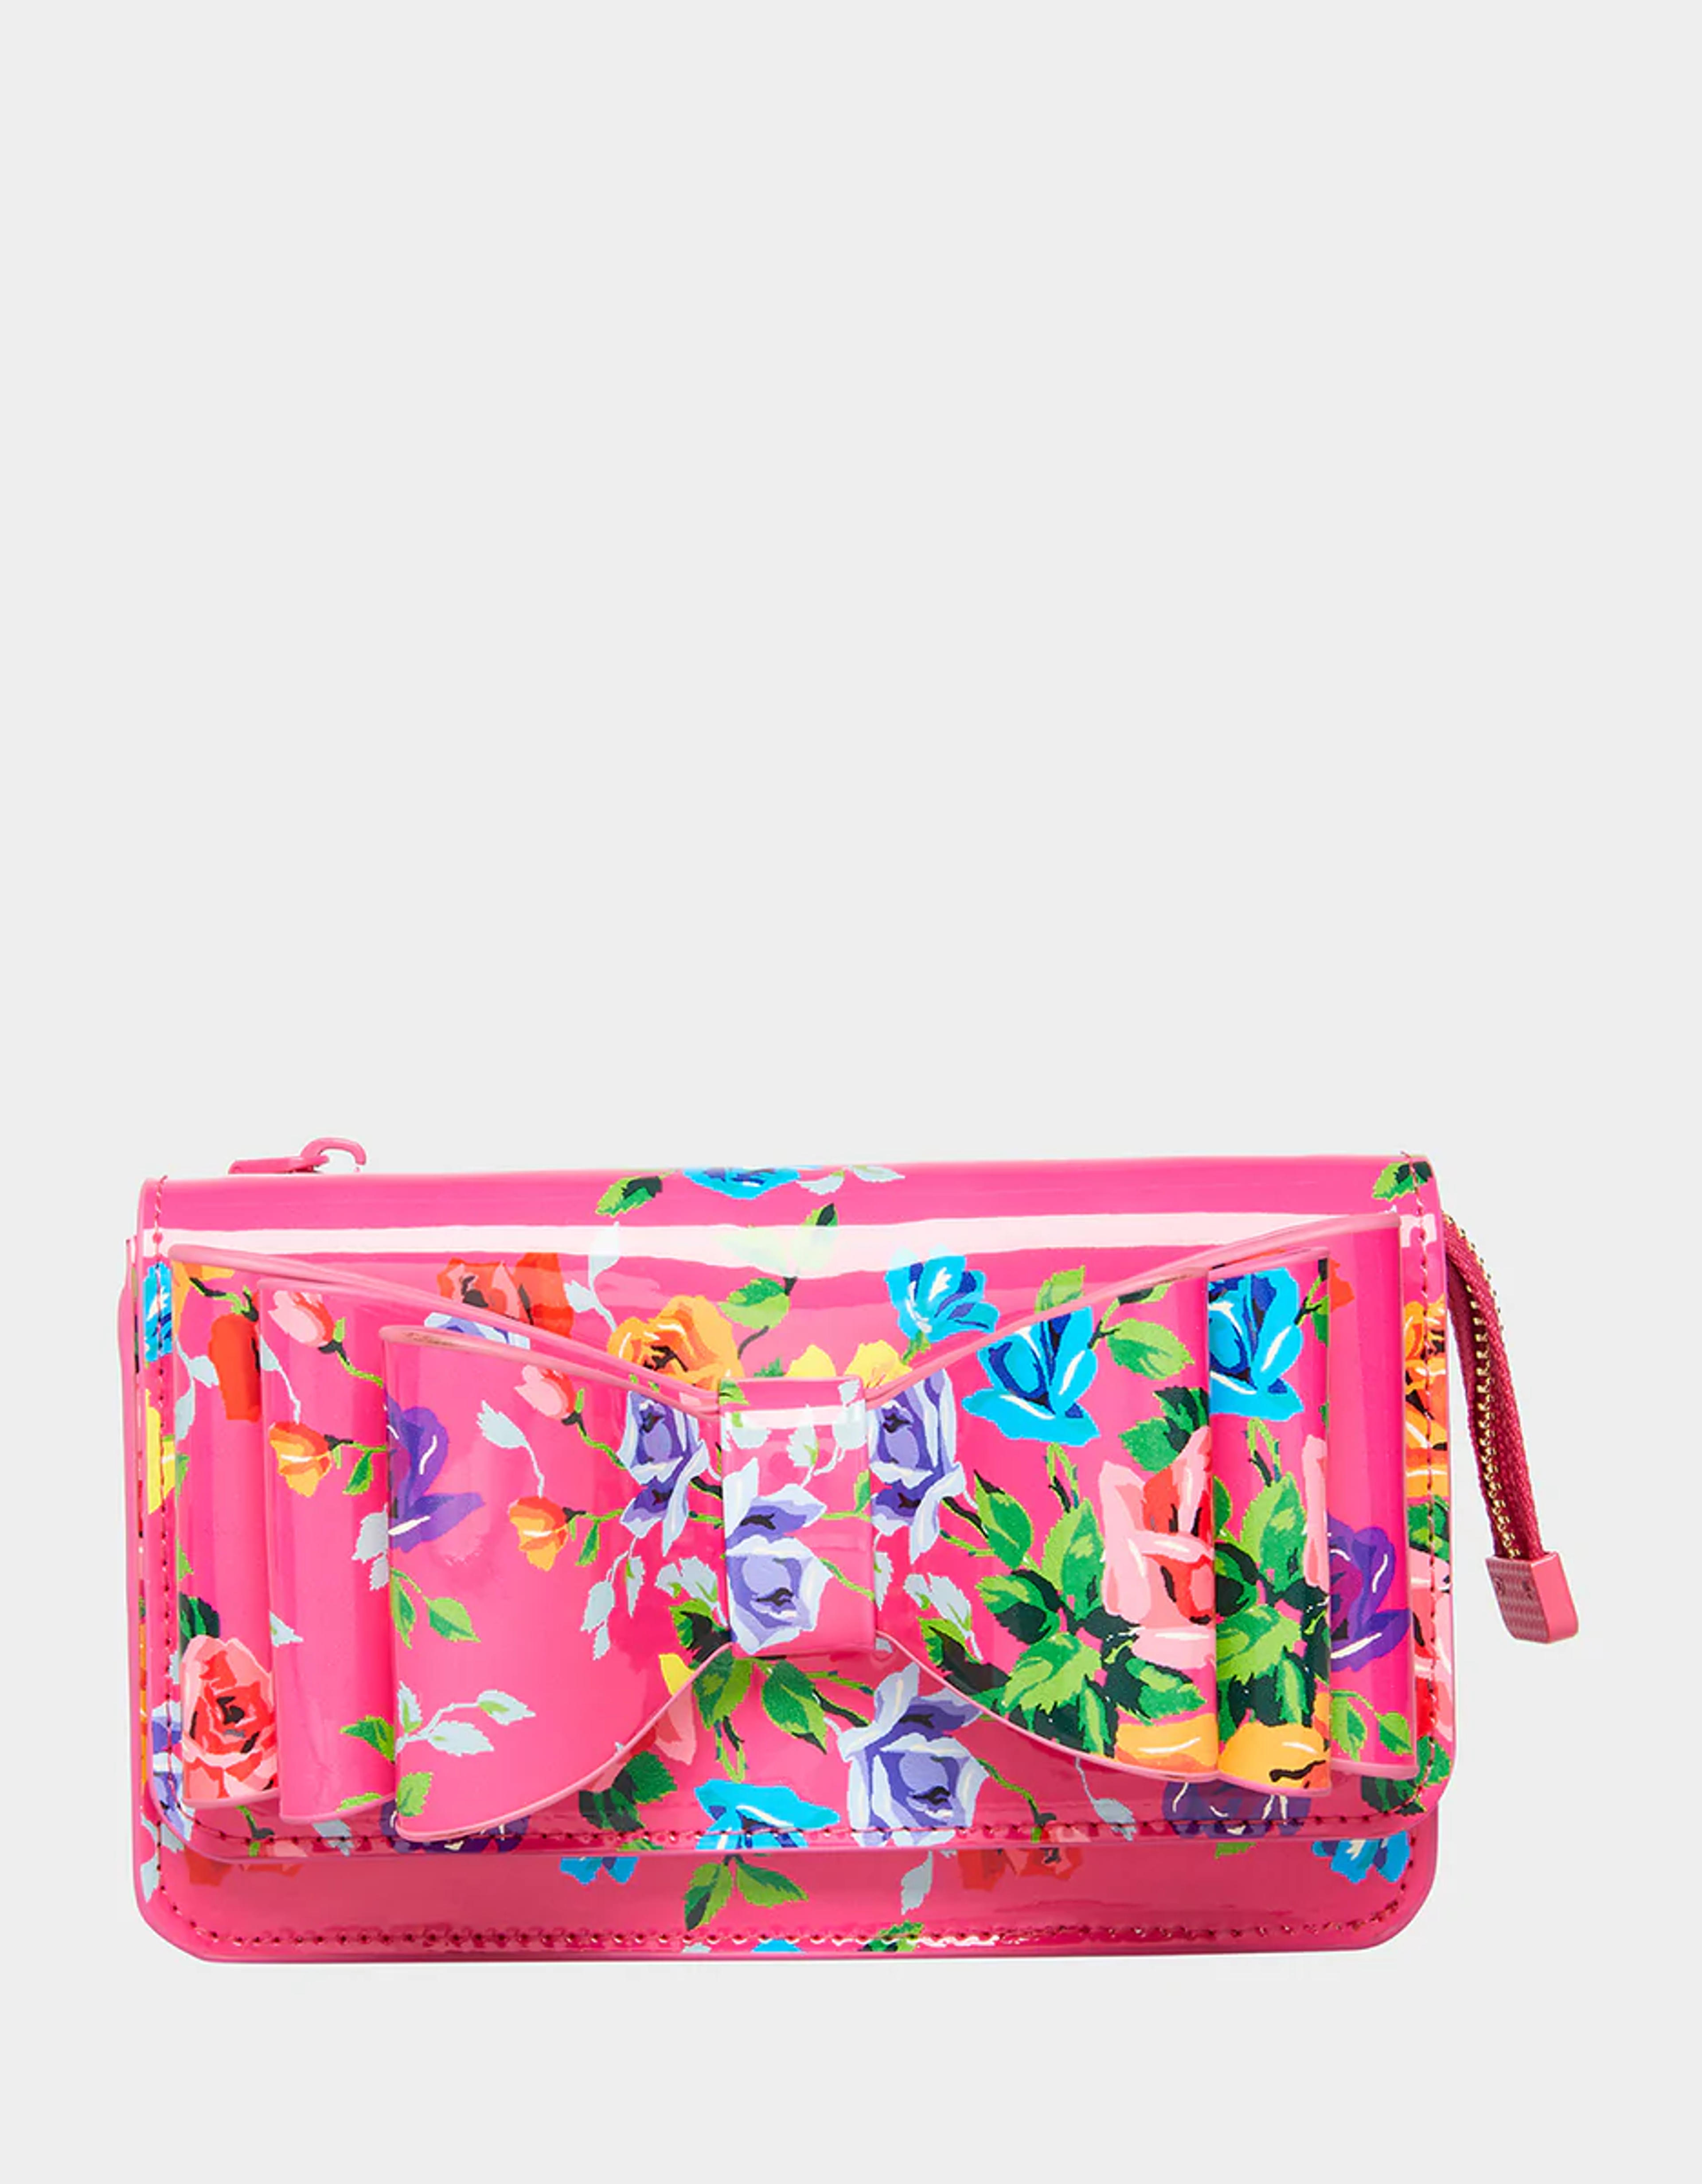 HERE FOR THE BOWS CROSSBODY PINK